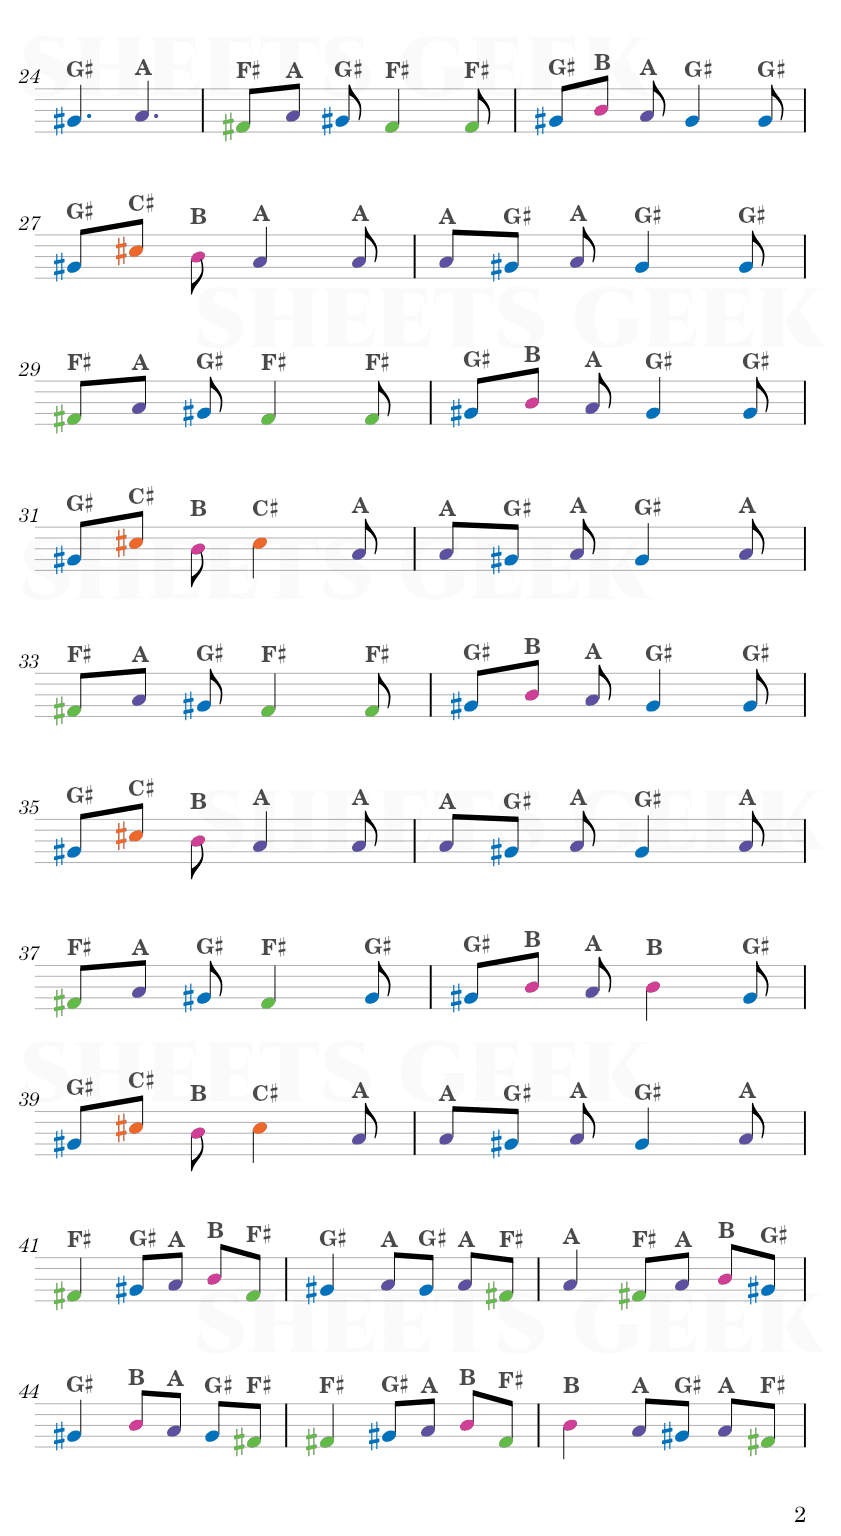 Circus Monster - Megurine Luka (CircusP) Easy Sheet Music Free for piano, keyboard, flute, violin, sax, cello page 2